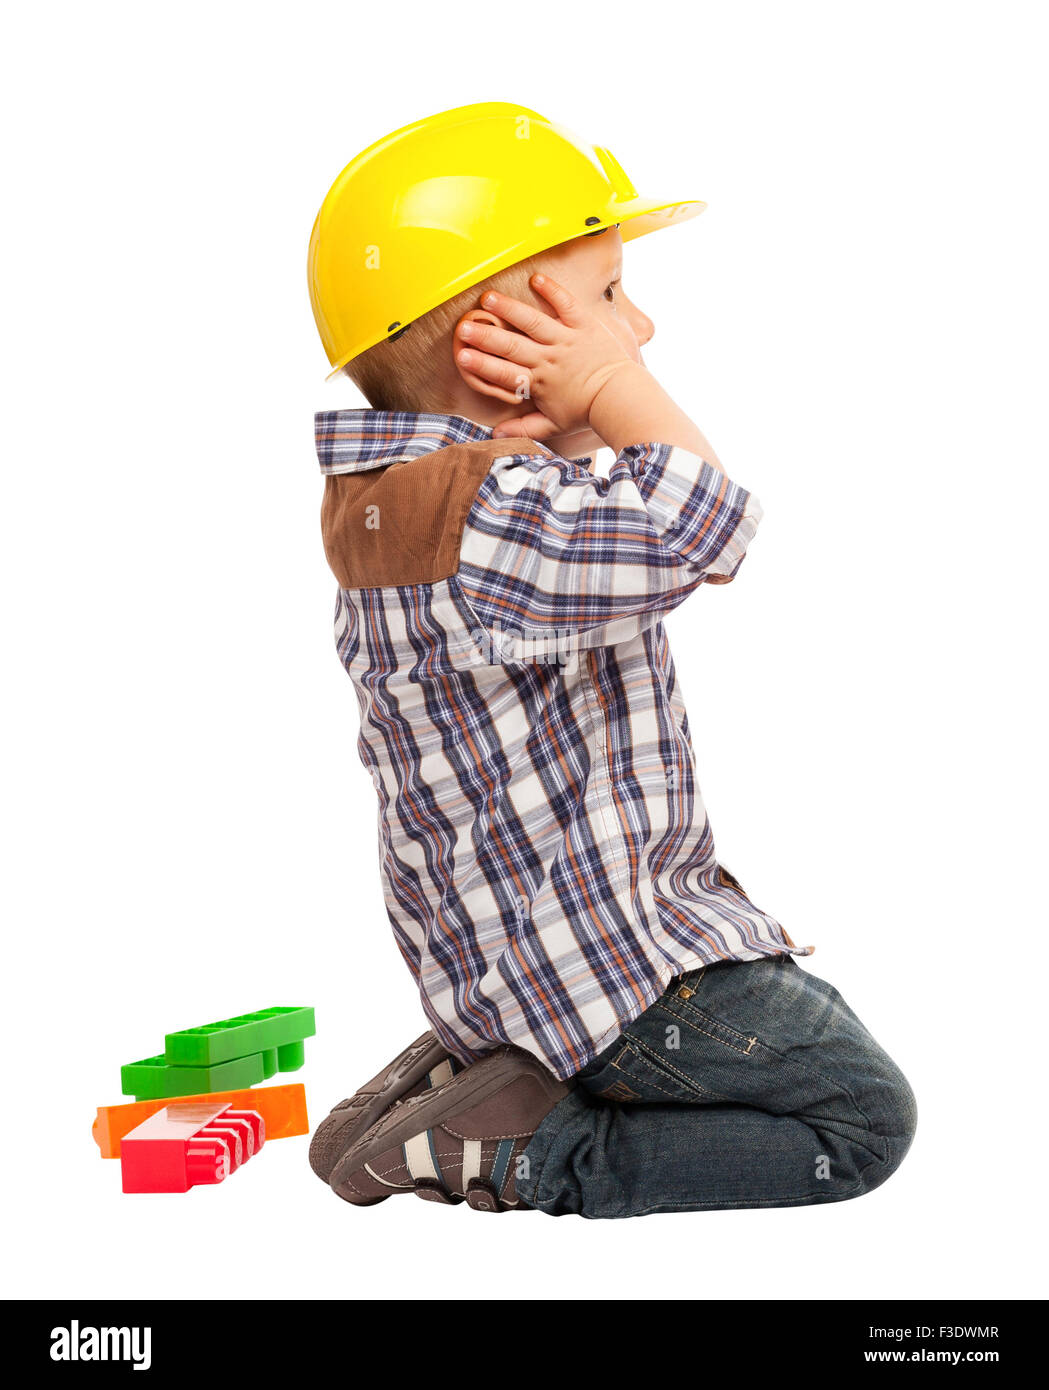 child play with construction toy blocks isolated on white Stock Photo